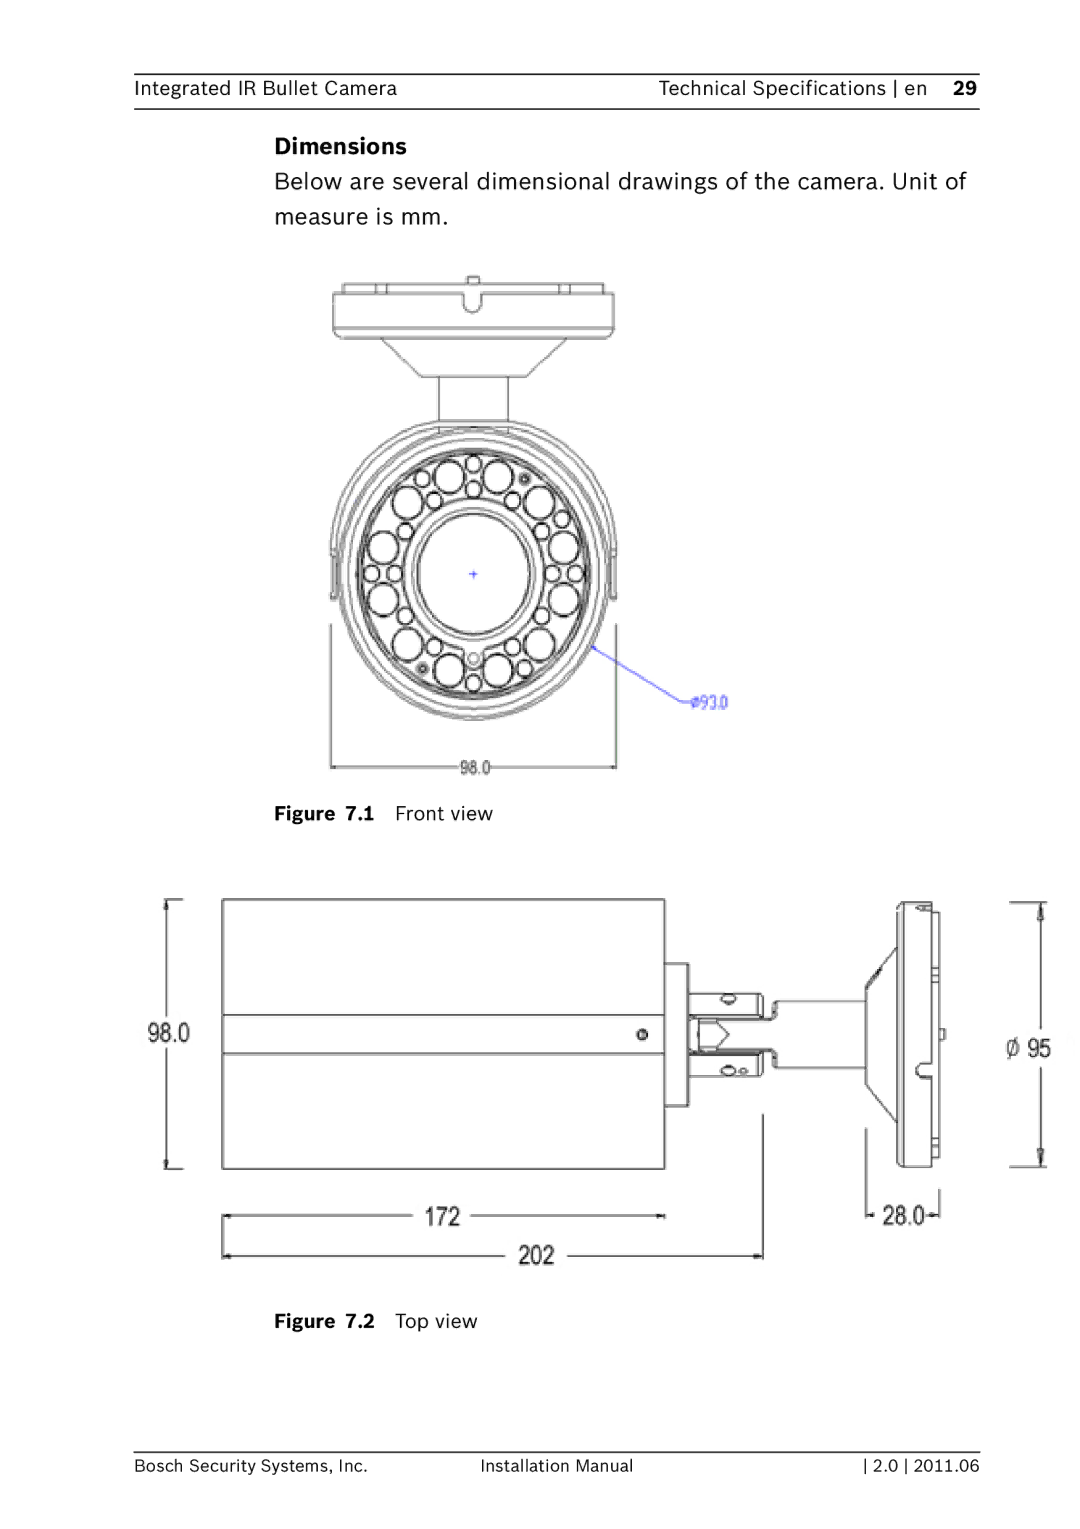 Bosch Appliances WZ20 installation manual Dimensions, Front view 